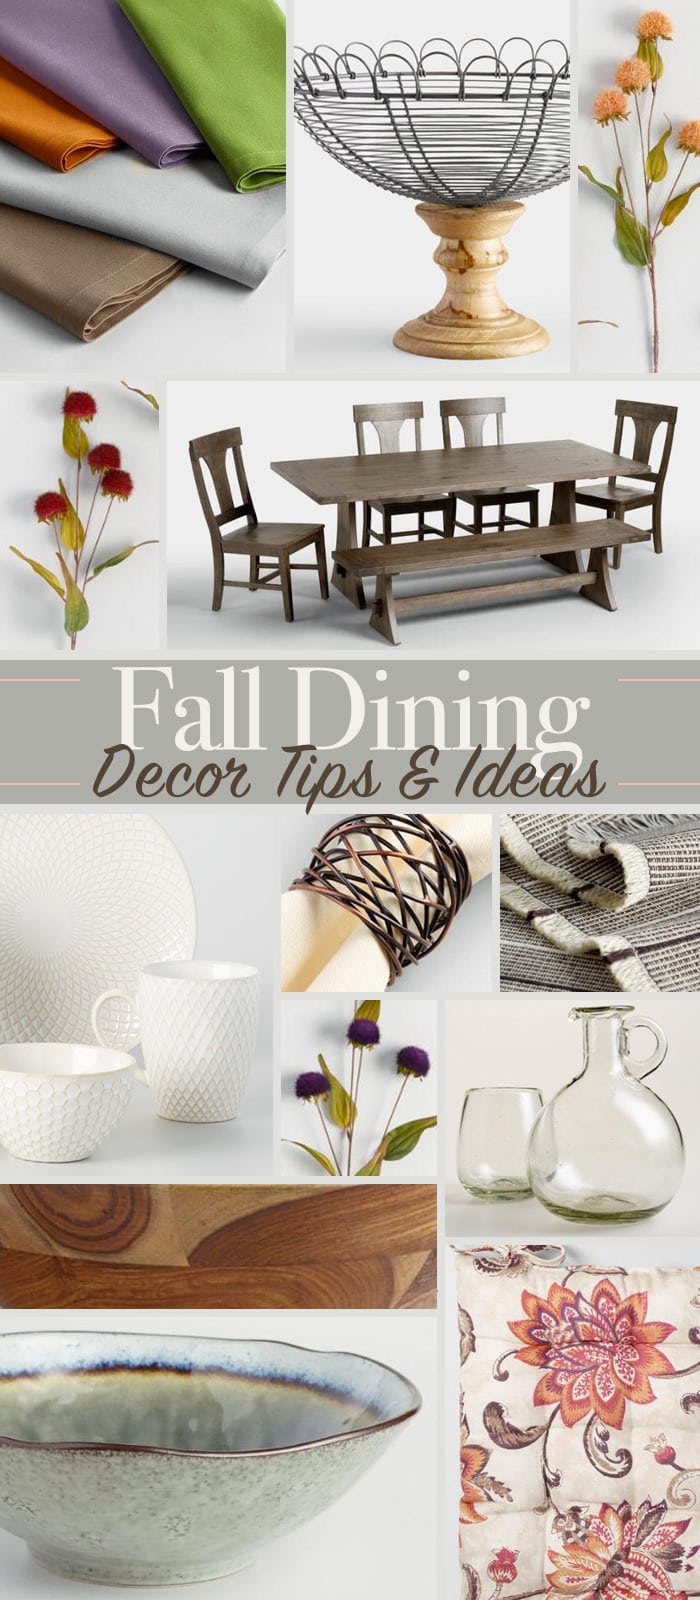 Fall dining decor tips and ideas